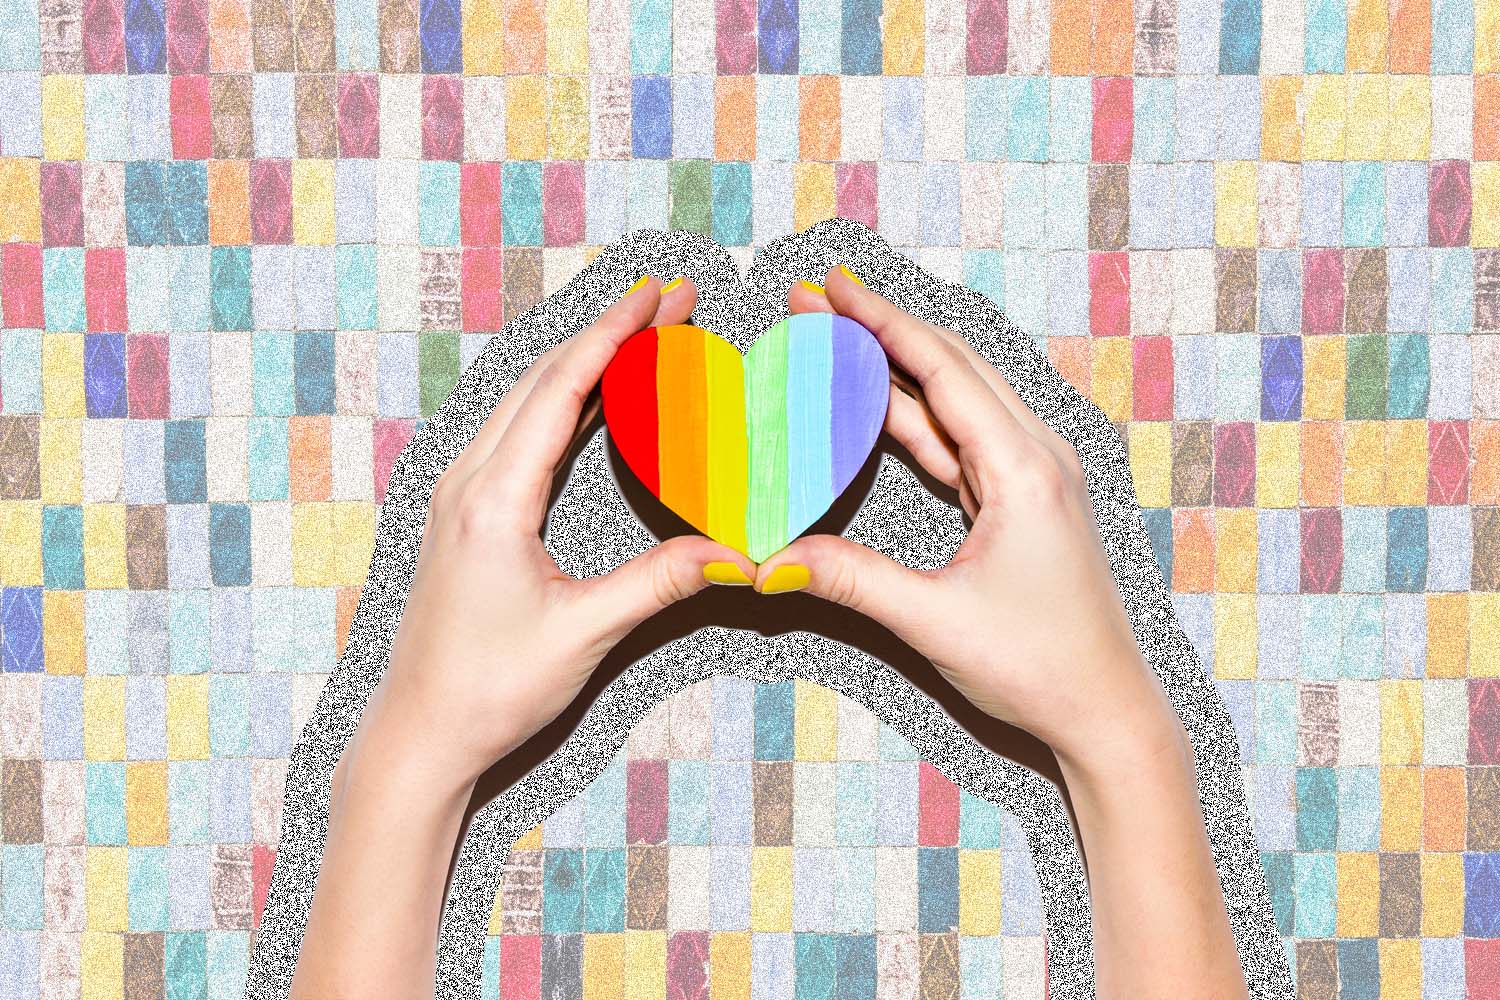 Image of hands holding a rainbow heart